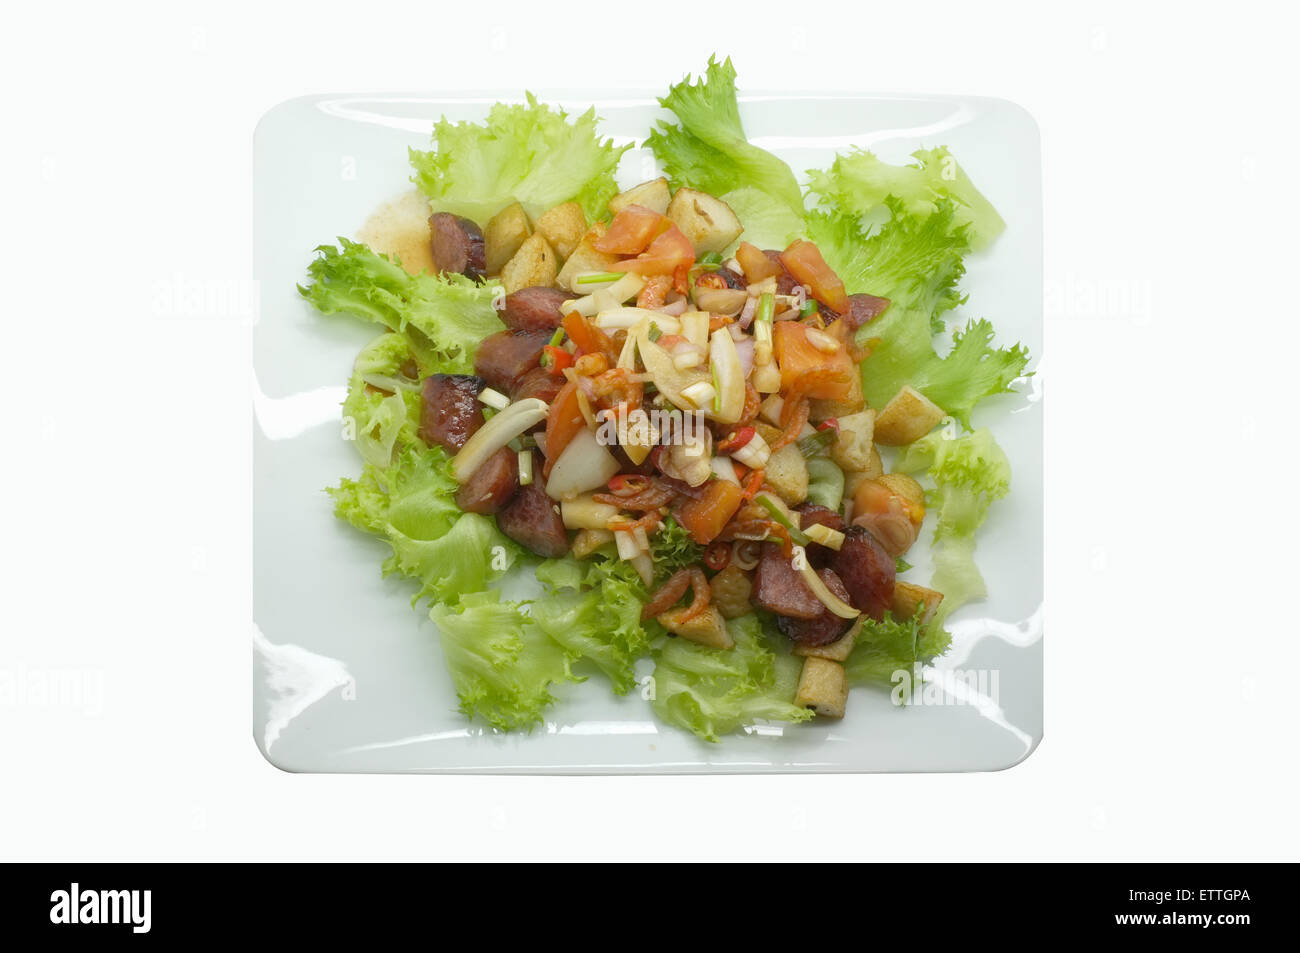 Thai spicy mixed salad with fish ball, Chinese sausage, dried shrimp Stock Photo